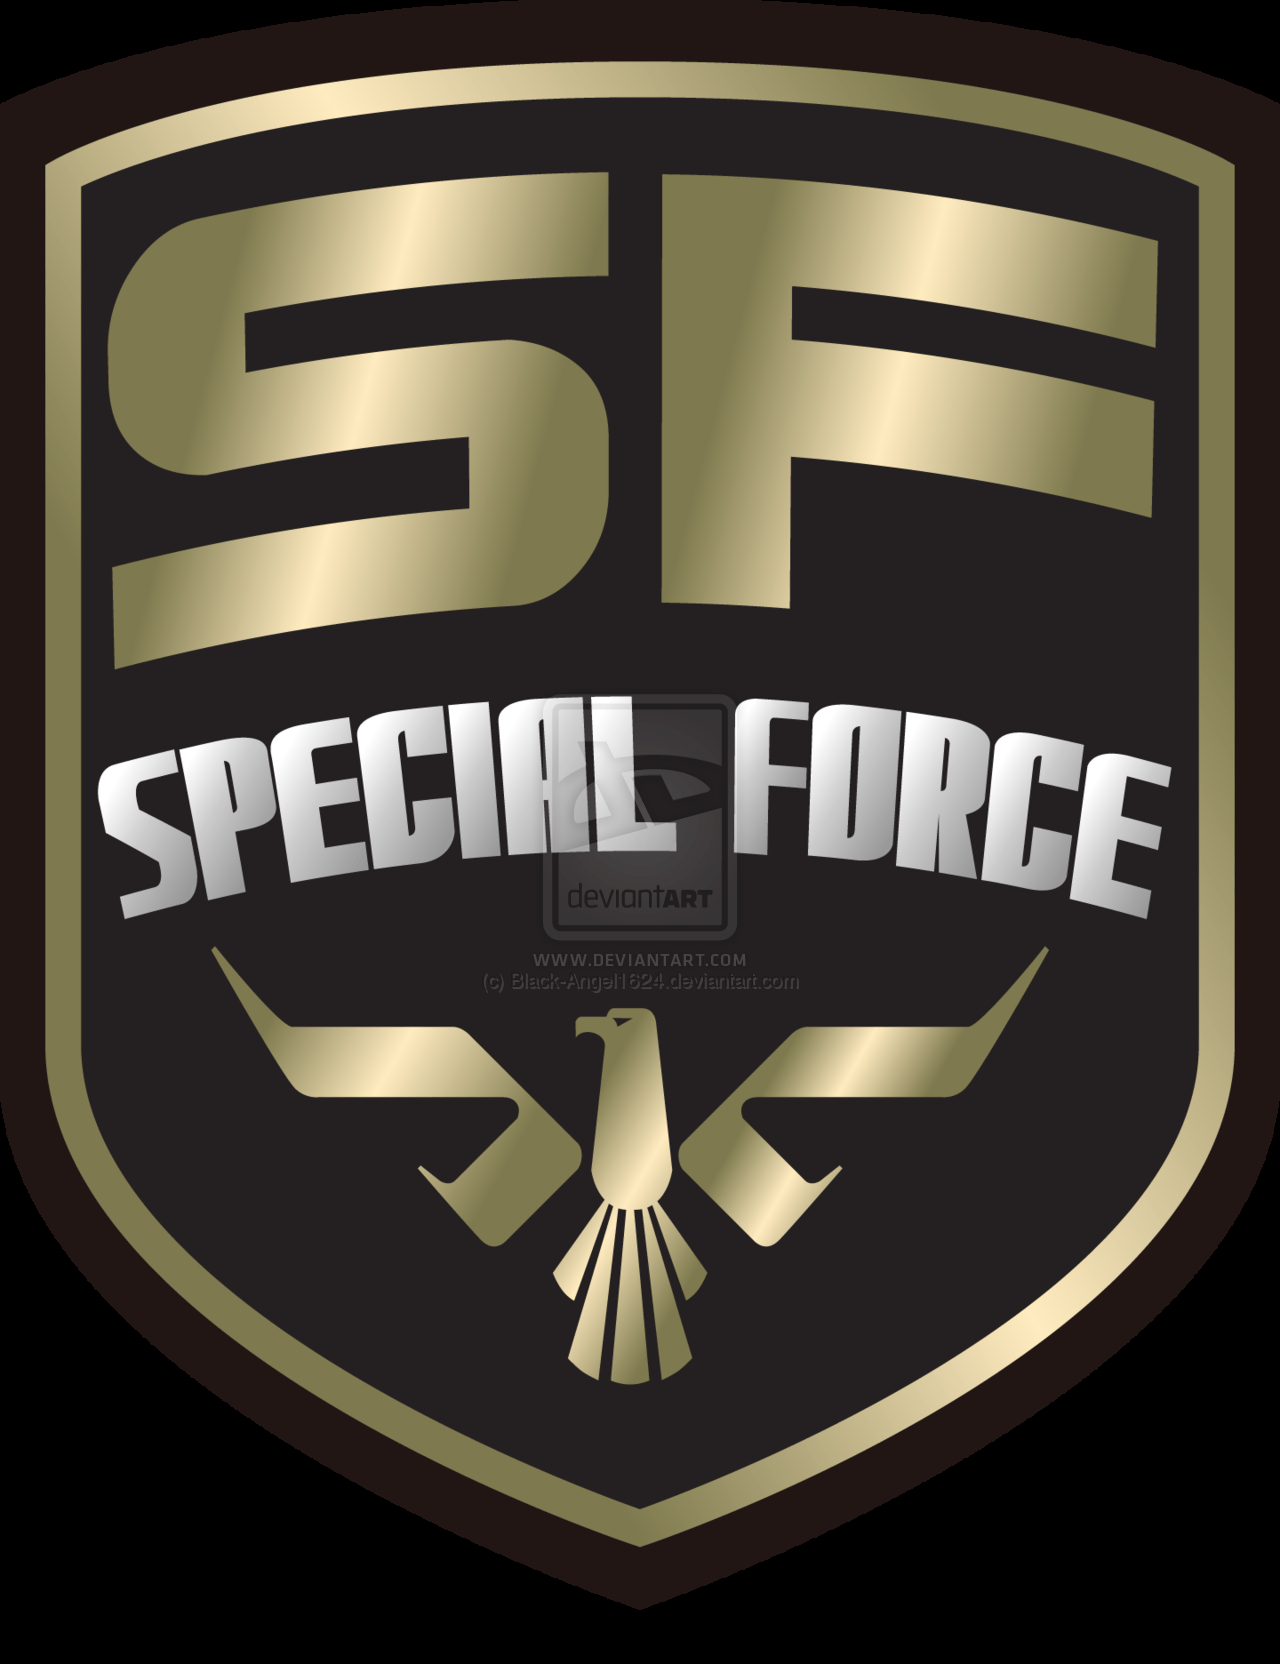 Special Forces Logo - Special forces Logos